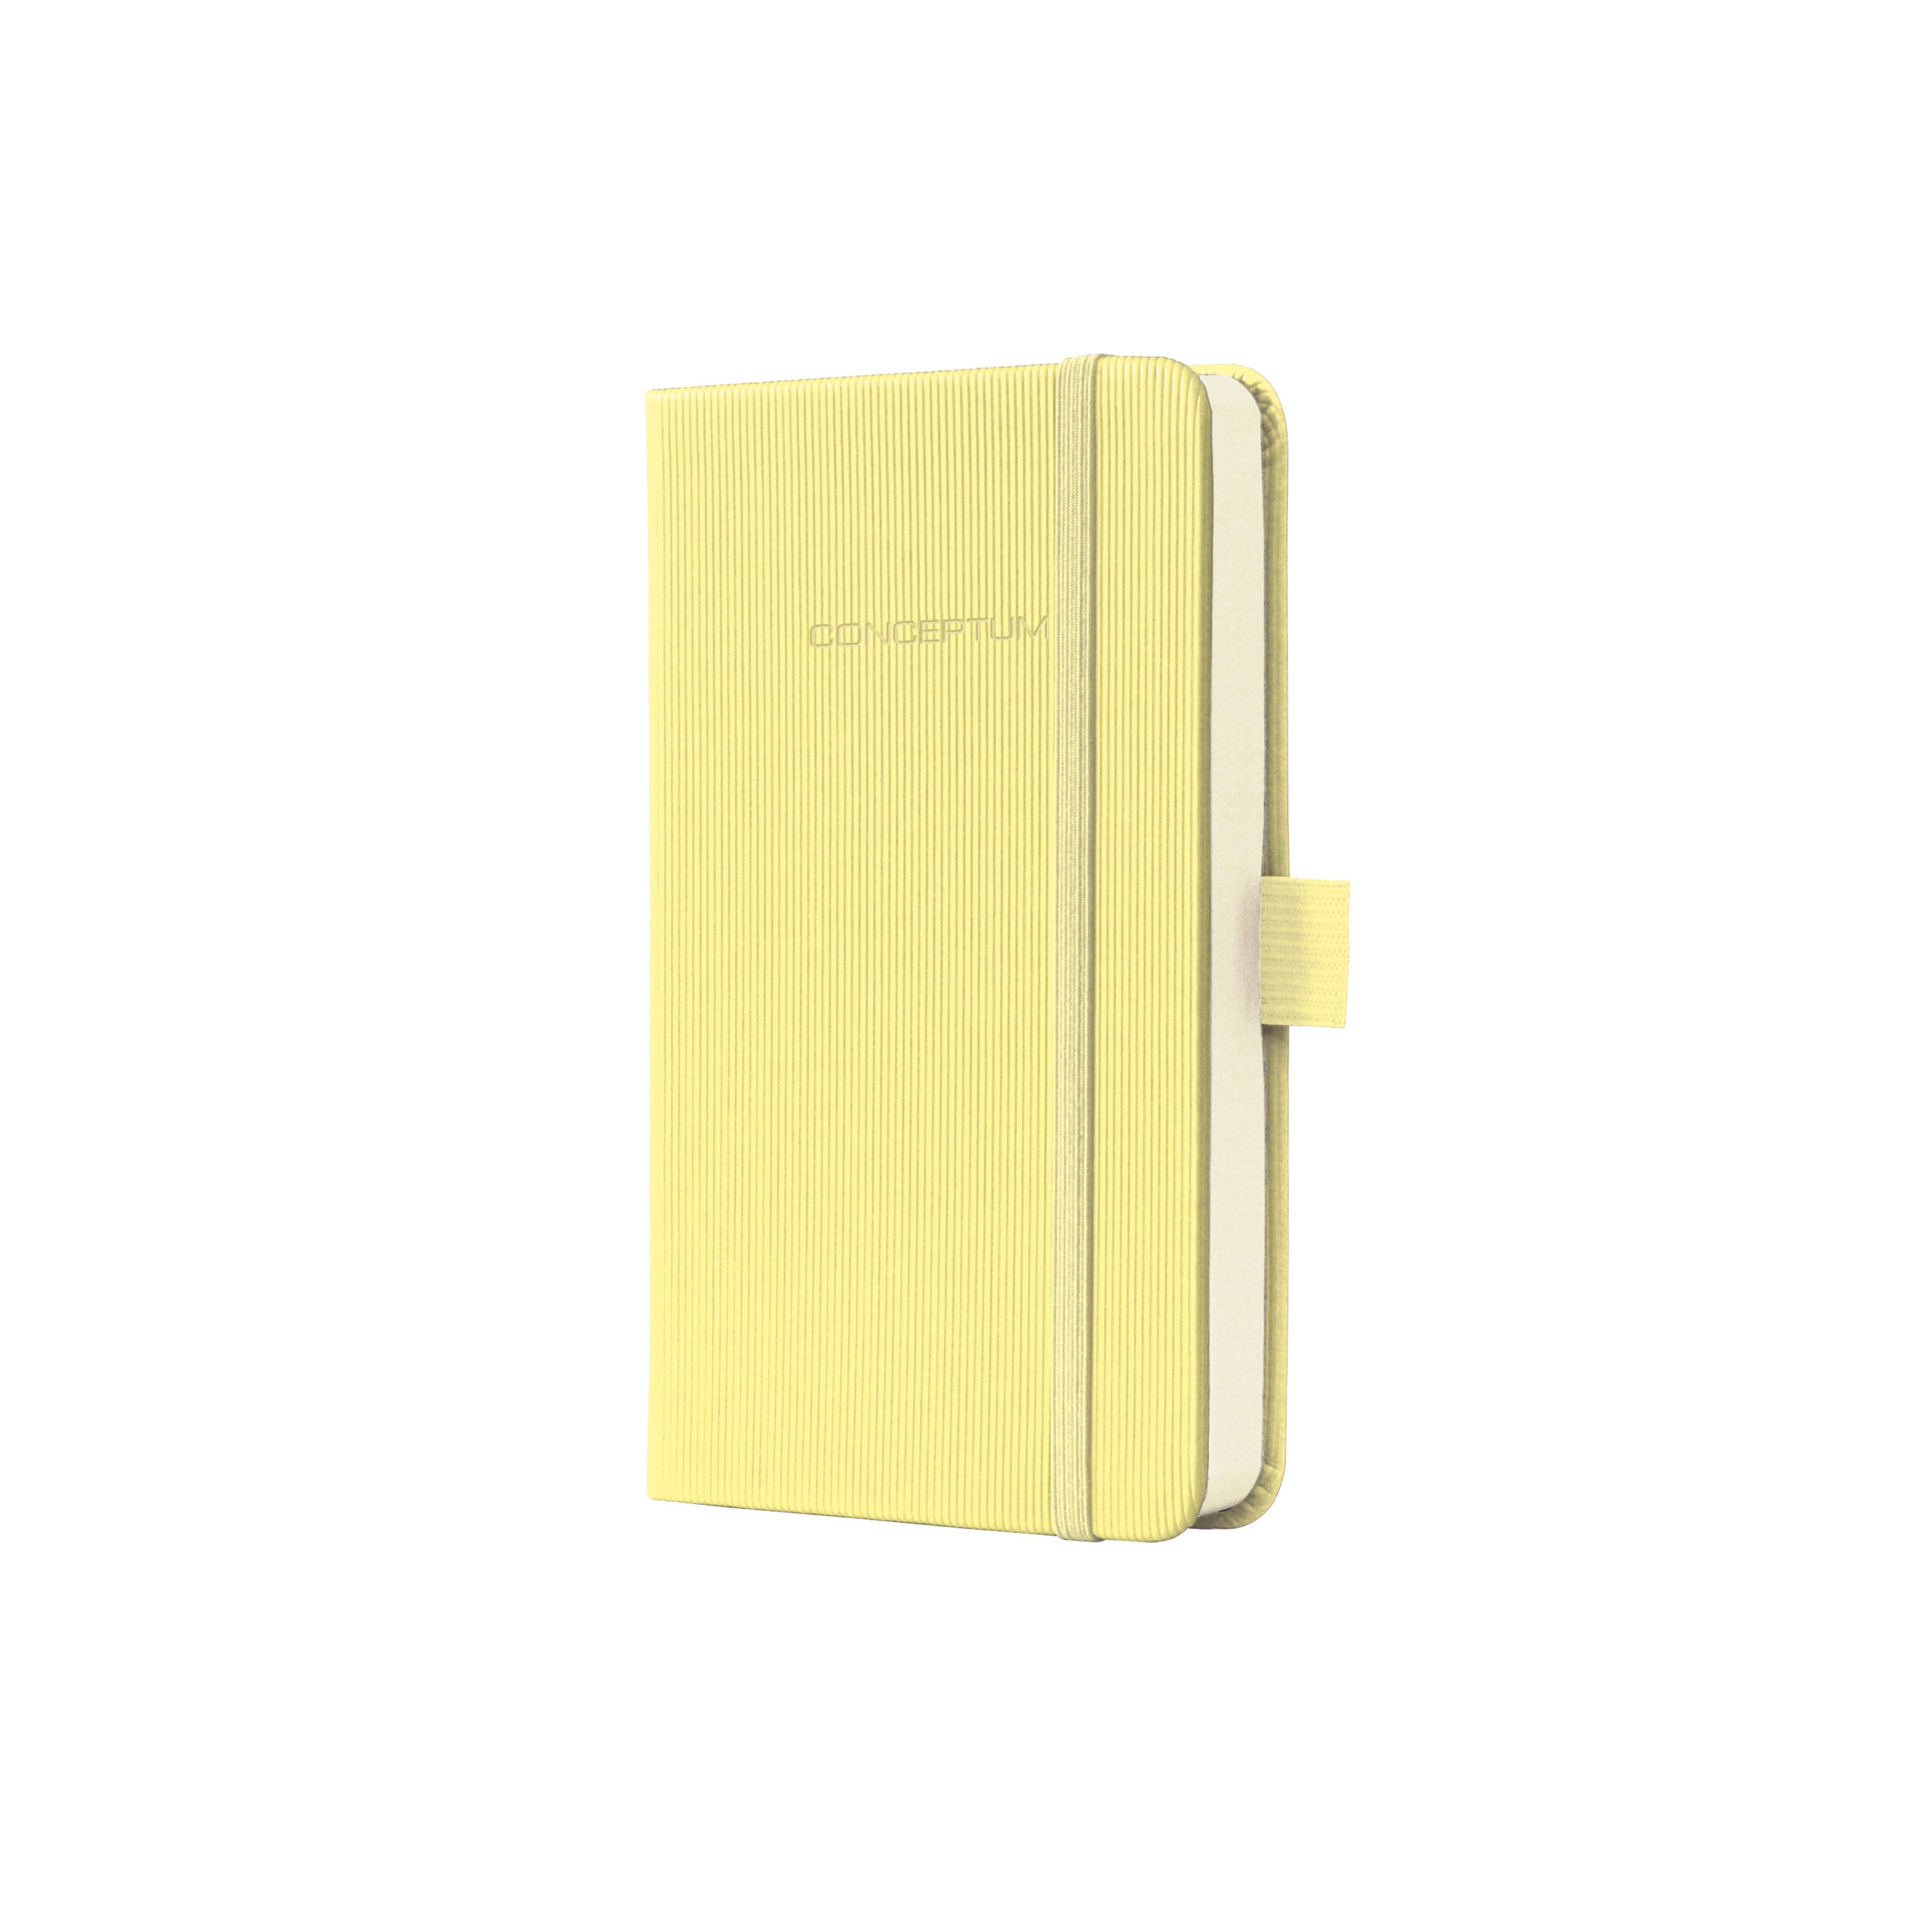 Taccuino 95x150x20mm a Quadr 194pagsmooth Yellow Hardcover Conceptum Sigel Co559